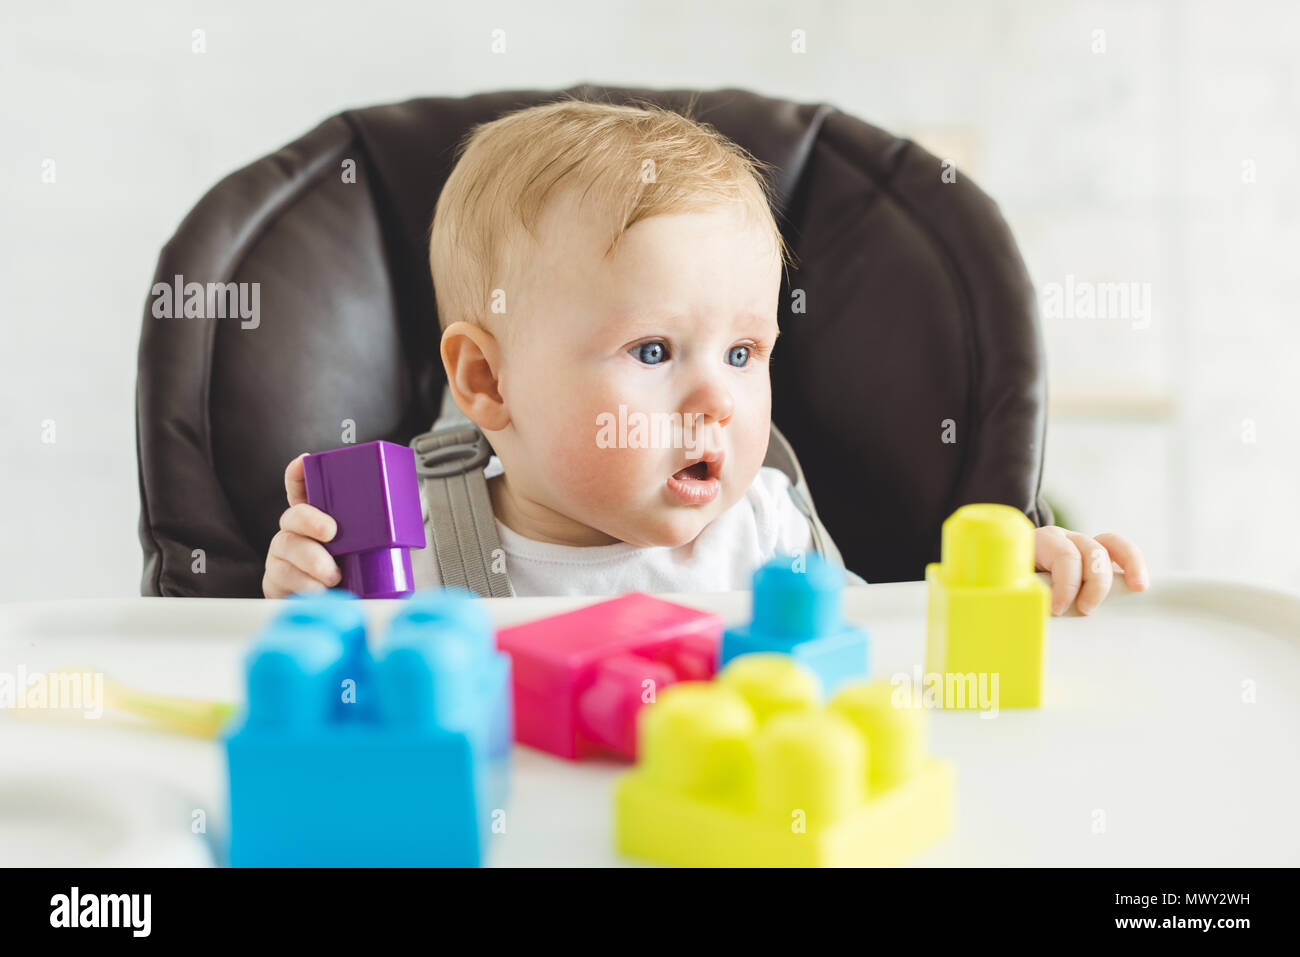 Adorable infant sititng in baby chair with plastic blocks Stock Photo